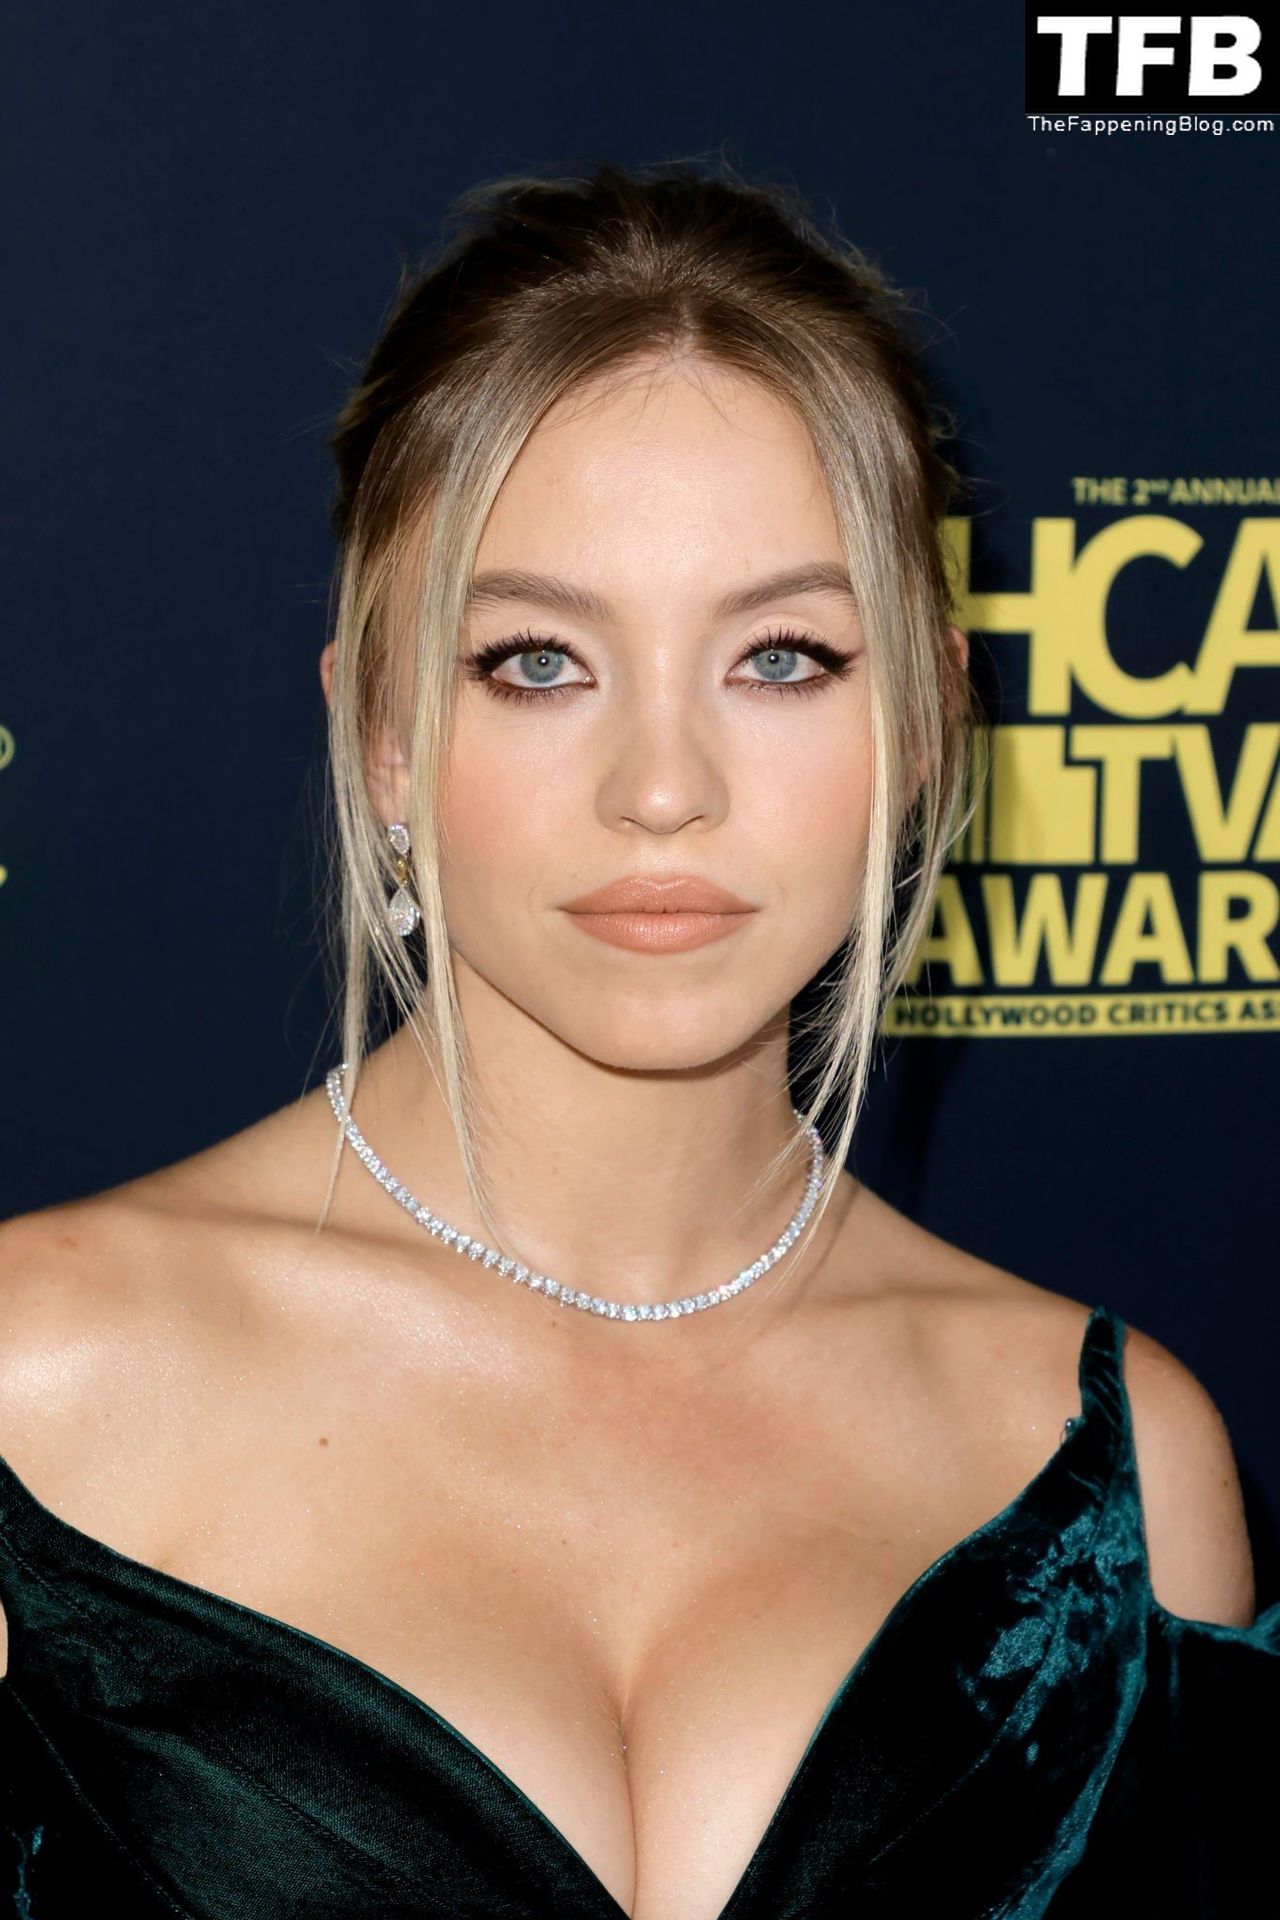 Sydney Sweeney Flaunts Nice Cleavage at the 2nd Annual HCA TV Awards (111 Photos)